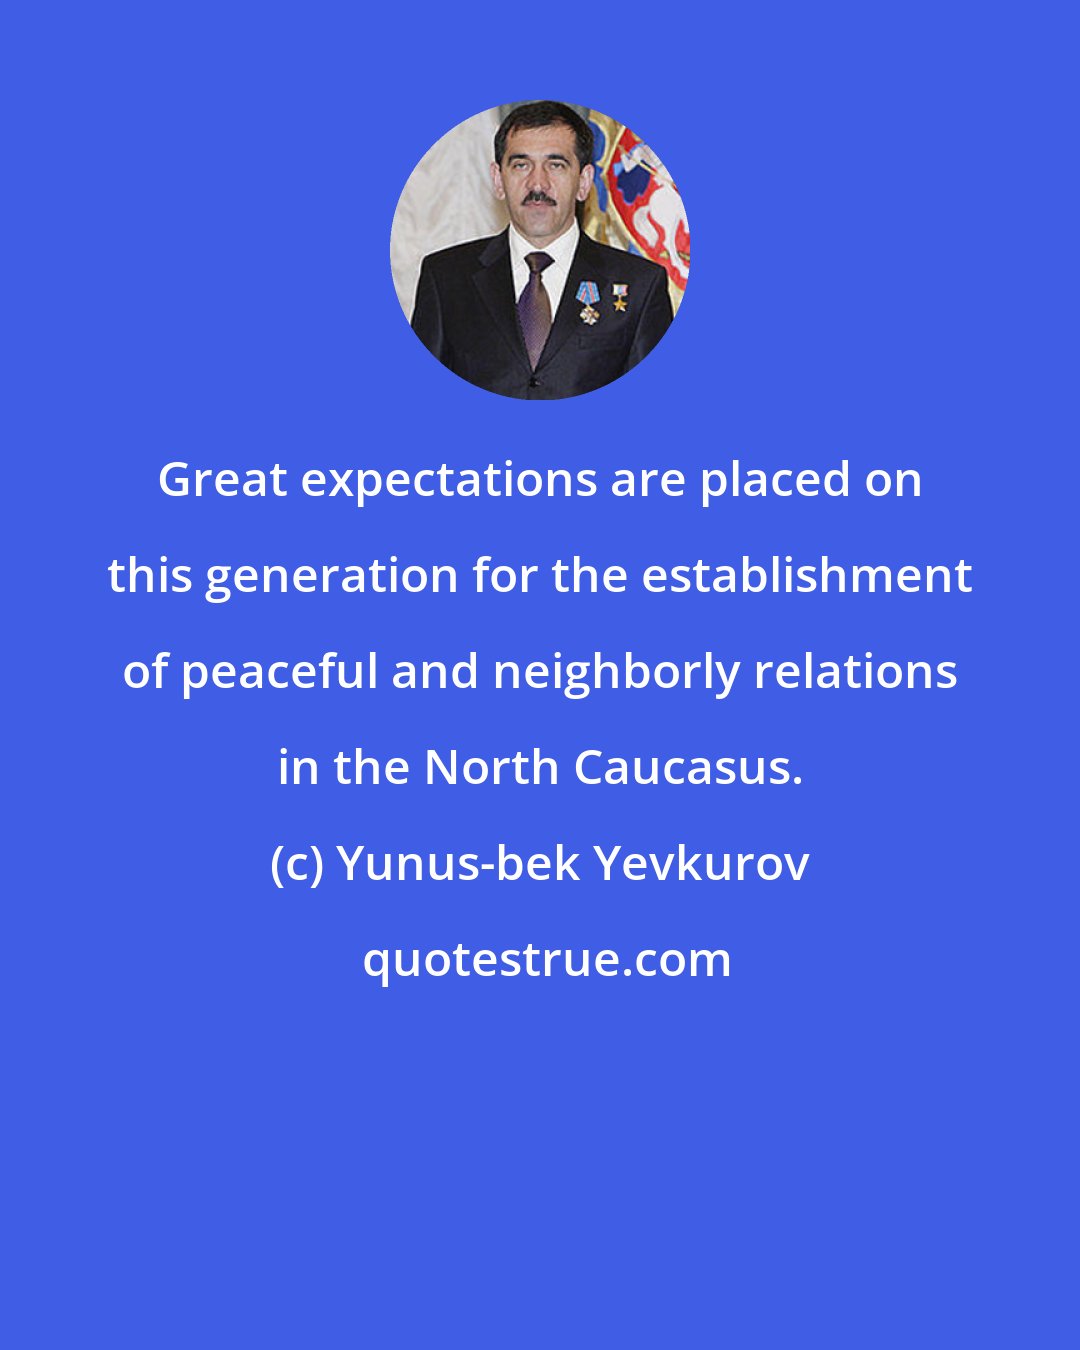 Yunus-bek Yevkurov: Great expectations are placed on this generation for the establishment of peaceful and neighborly relations in the North Caucasus.